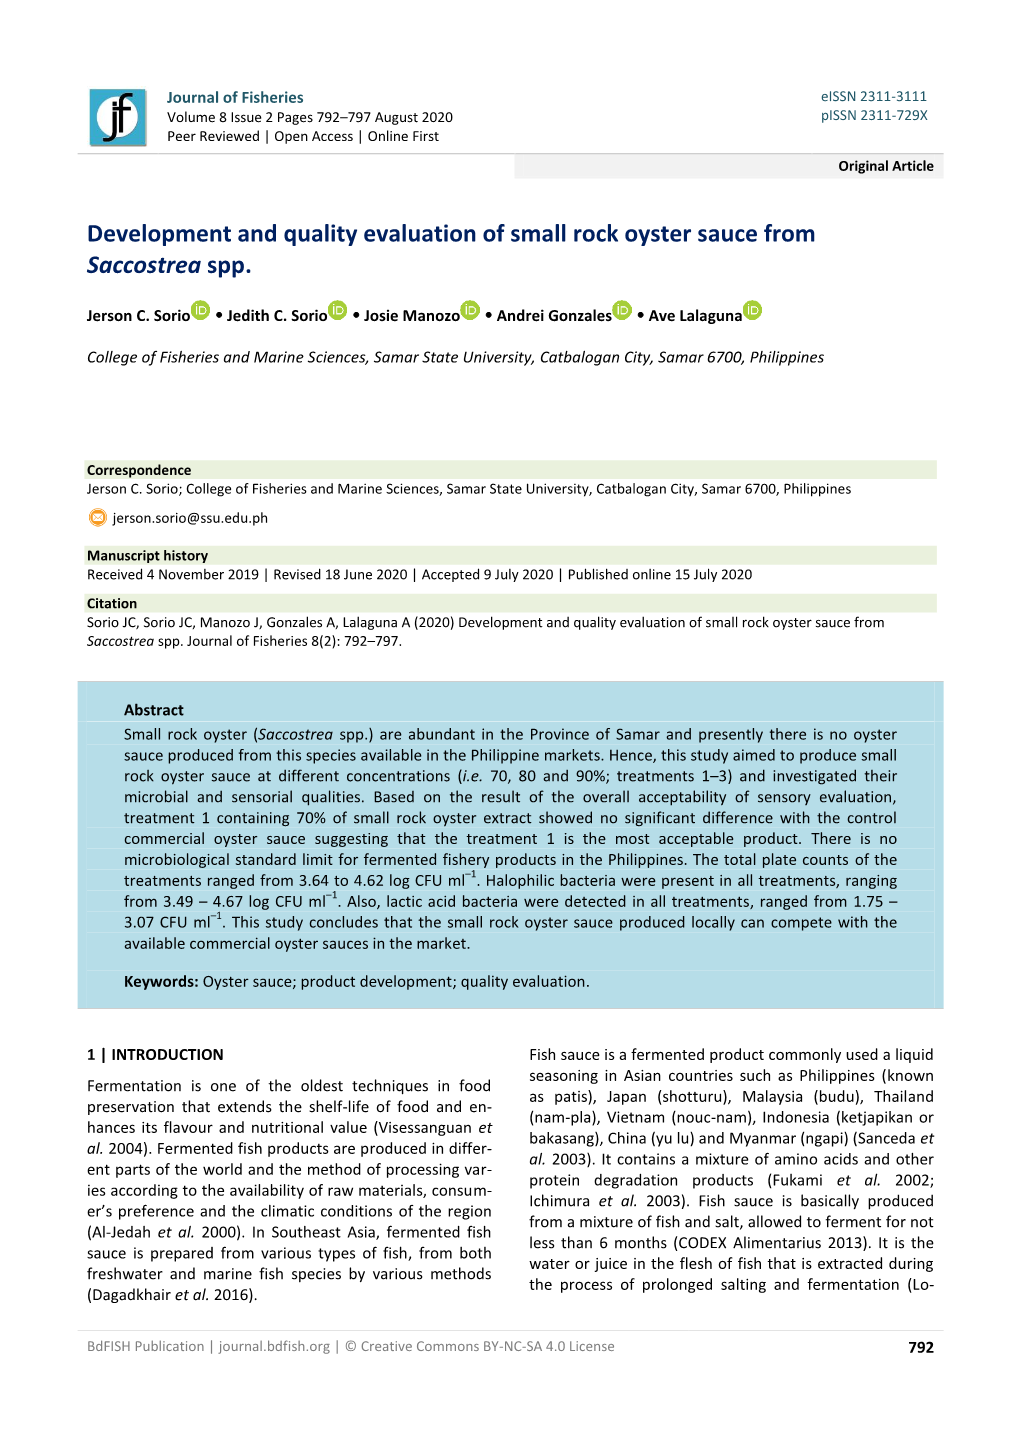 Development and Quality Evaluation of Small Rock Oyster Sauce from Saccostrea Spp